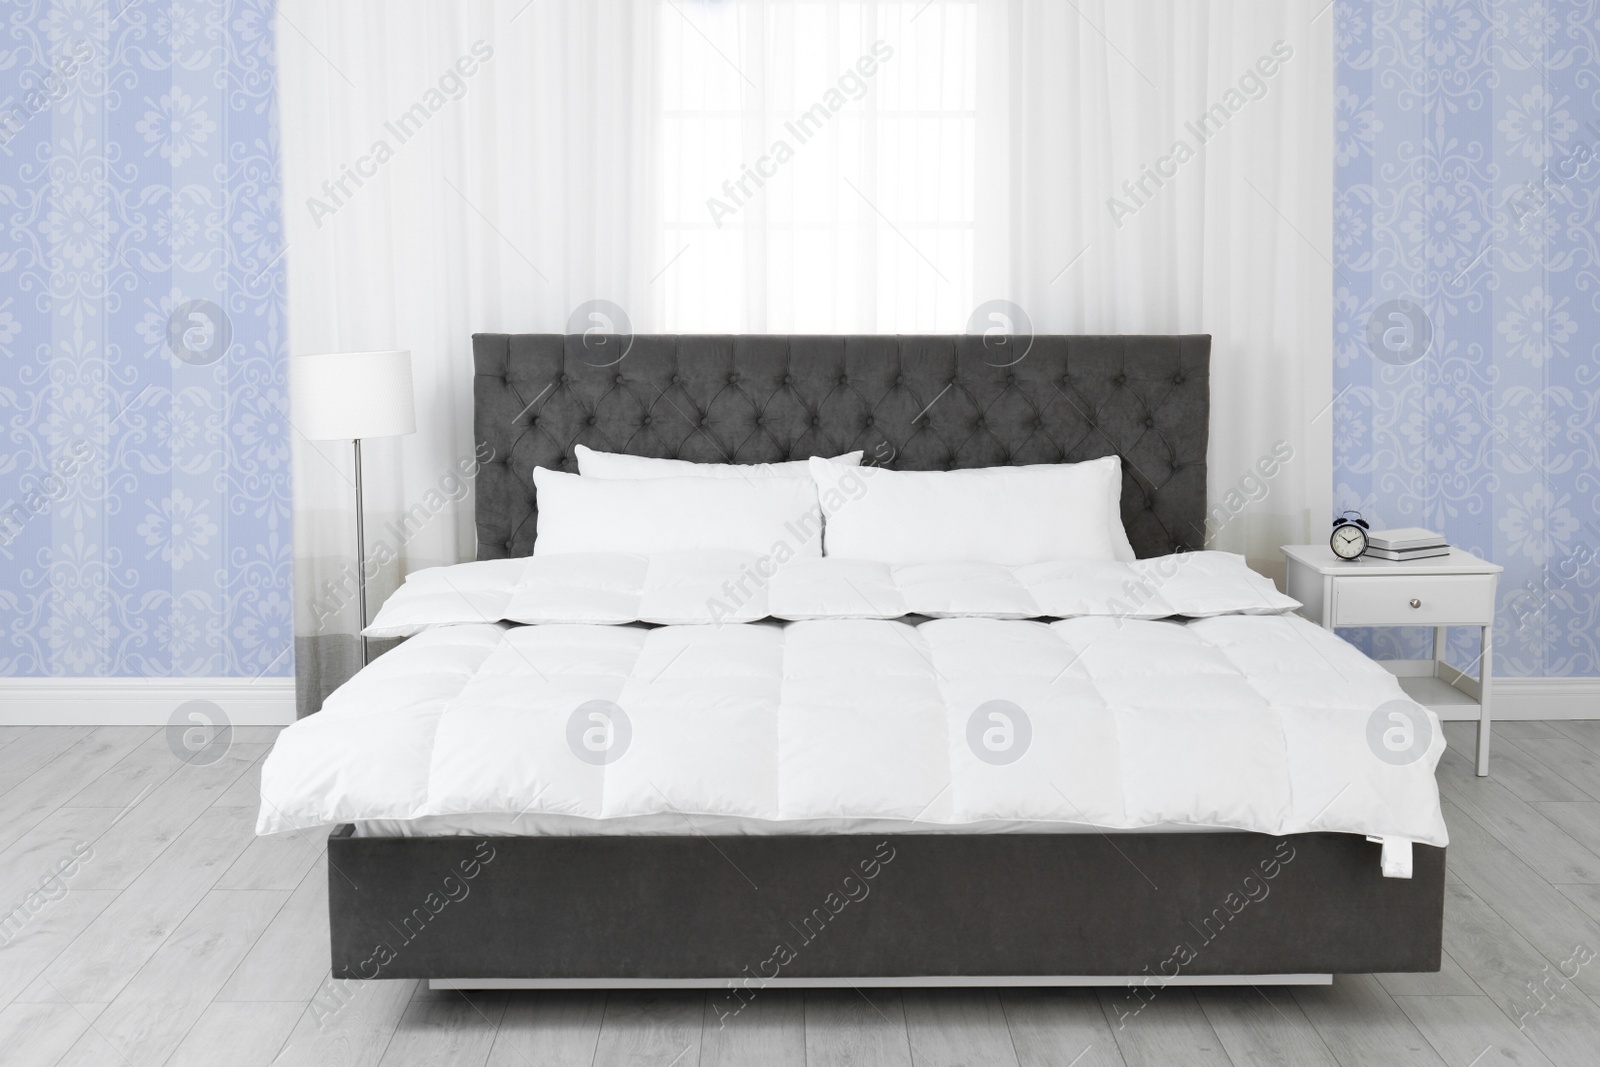 Image of Modern bedroom interior with furniture near patterned wallpapers